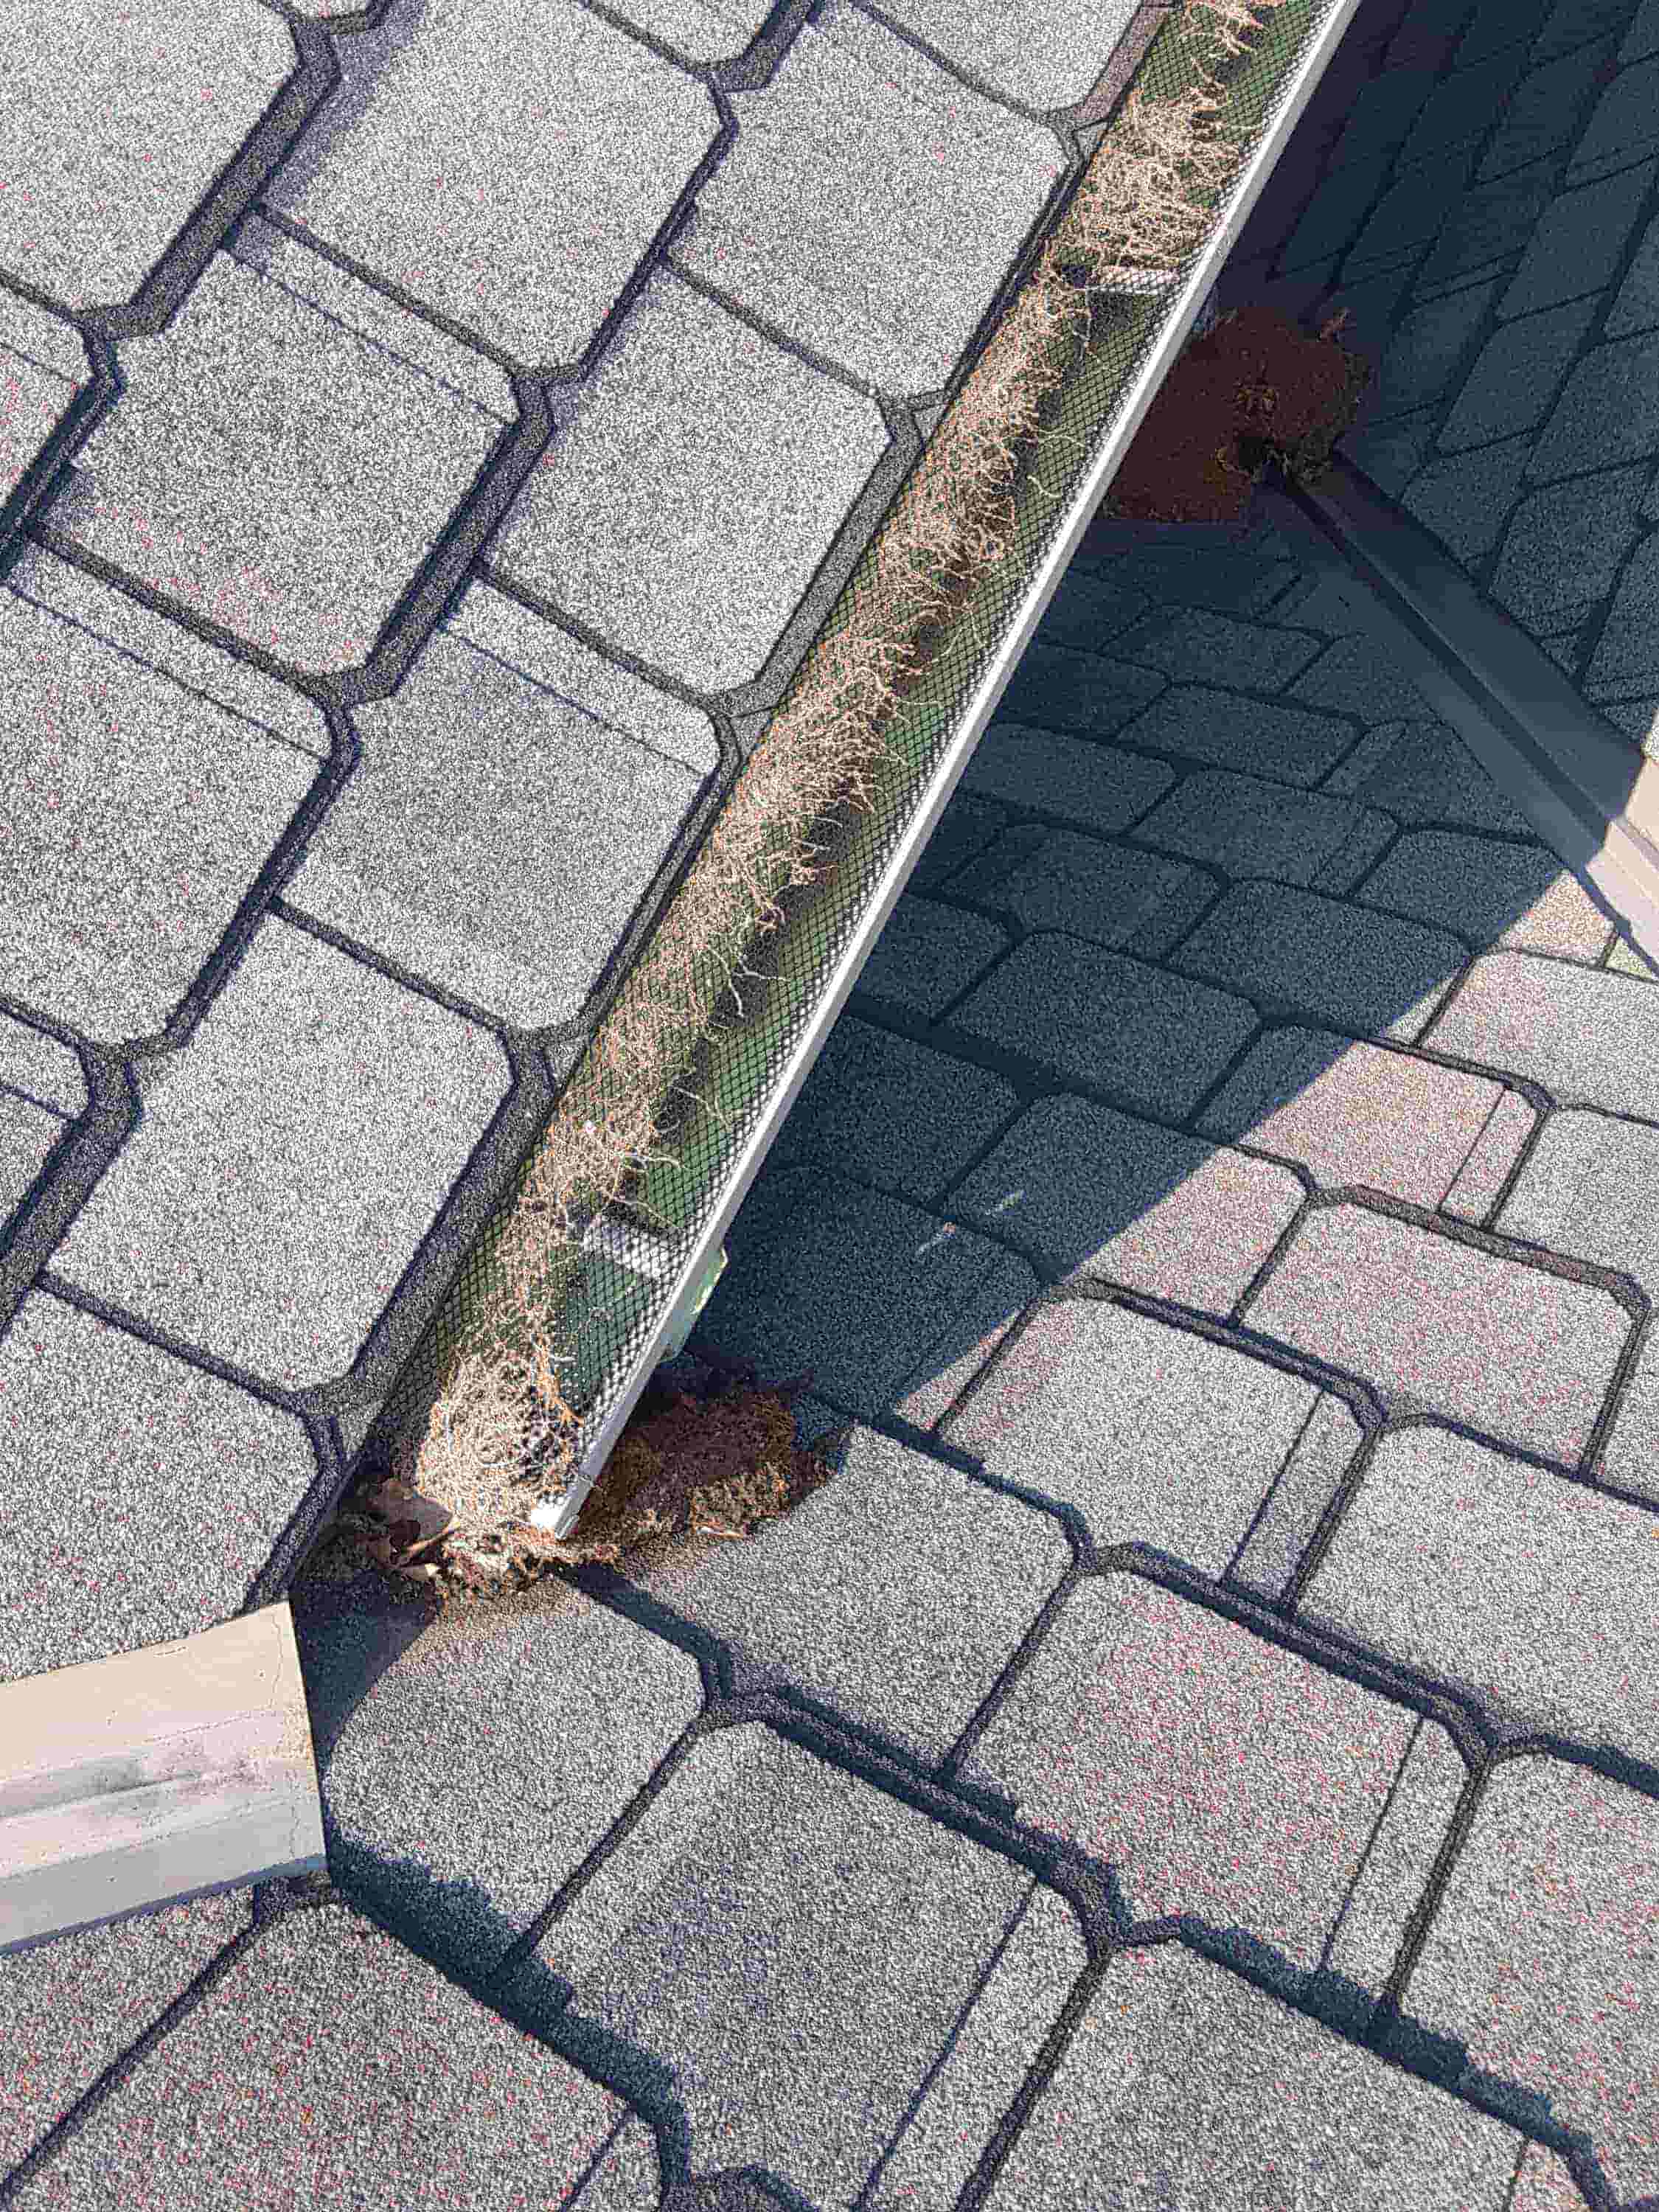 gutter cleaning and roof repair